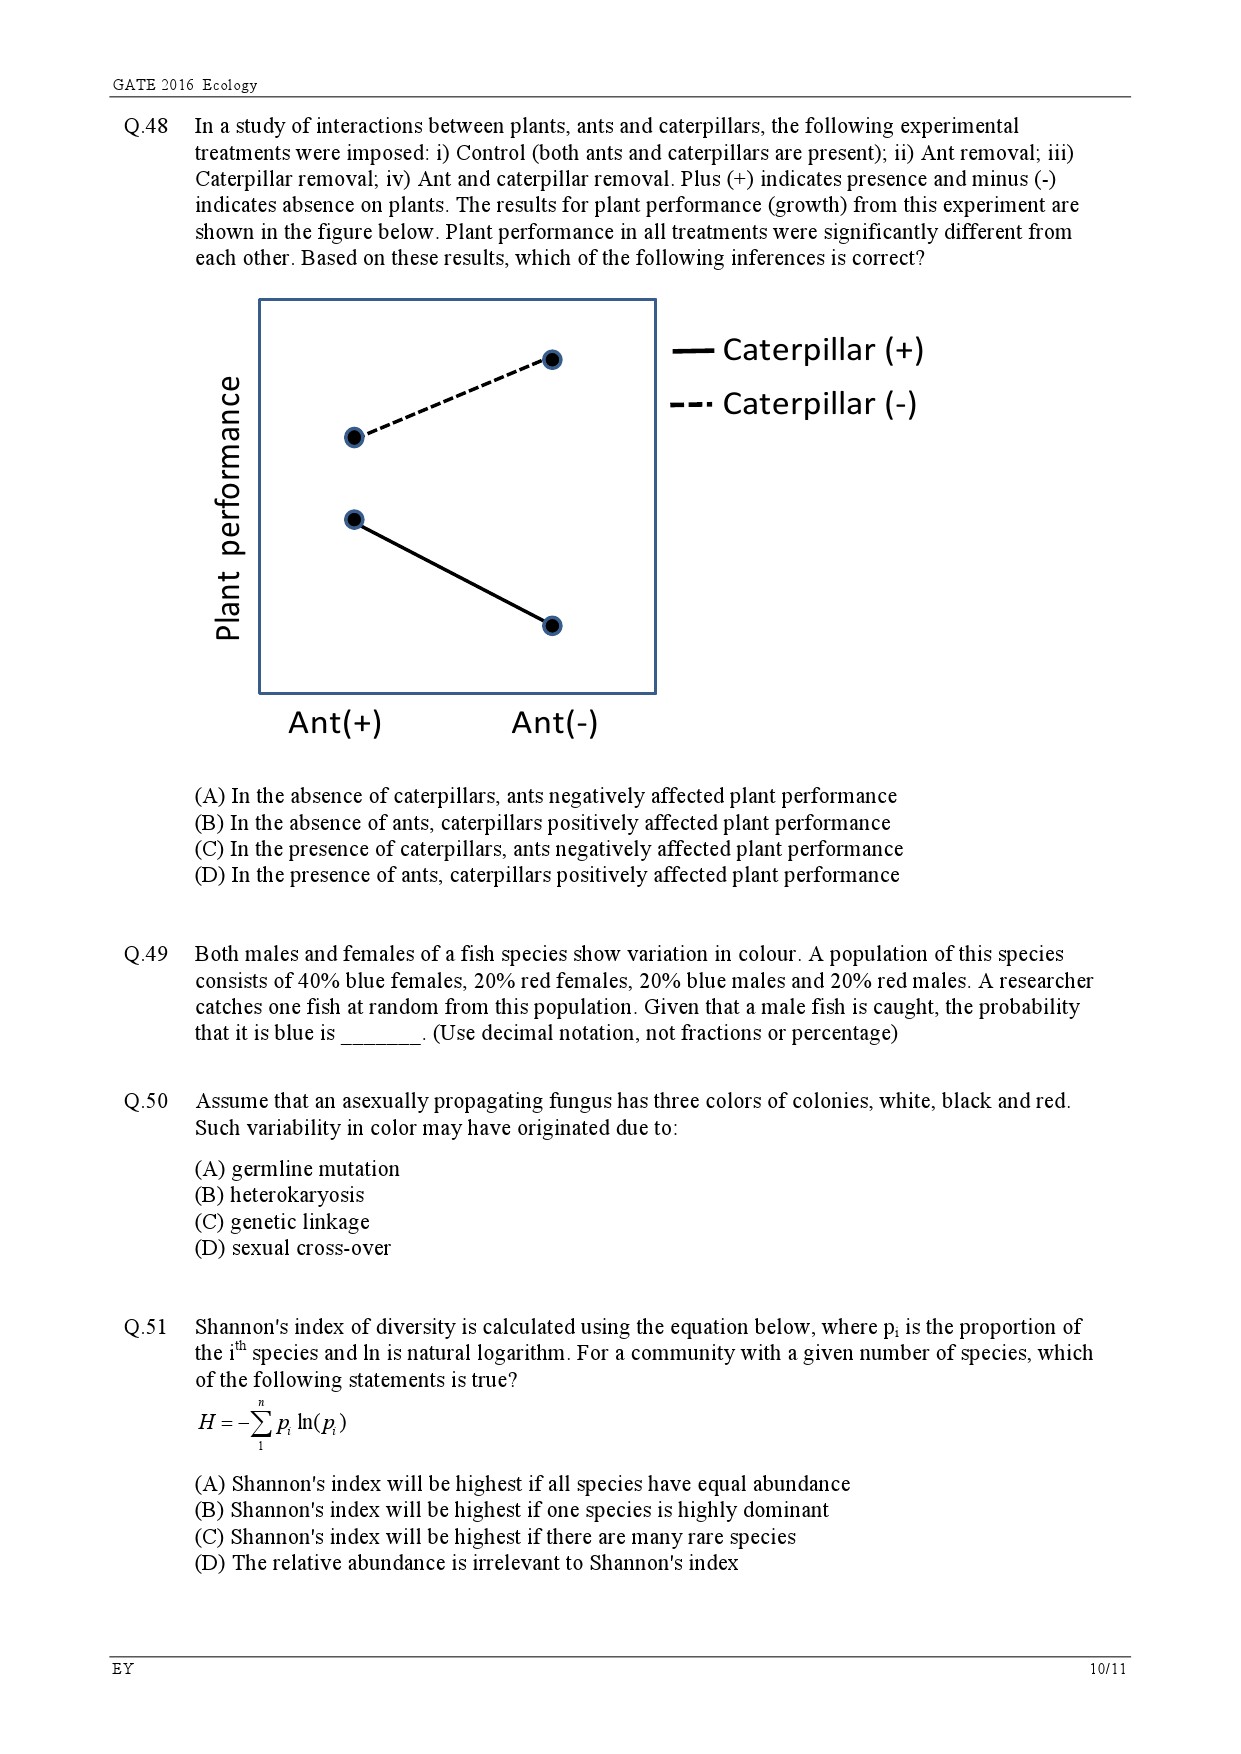 GATE Exam Question Paper 2016 Ecology and Evolution 13